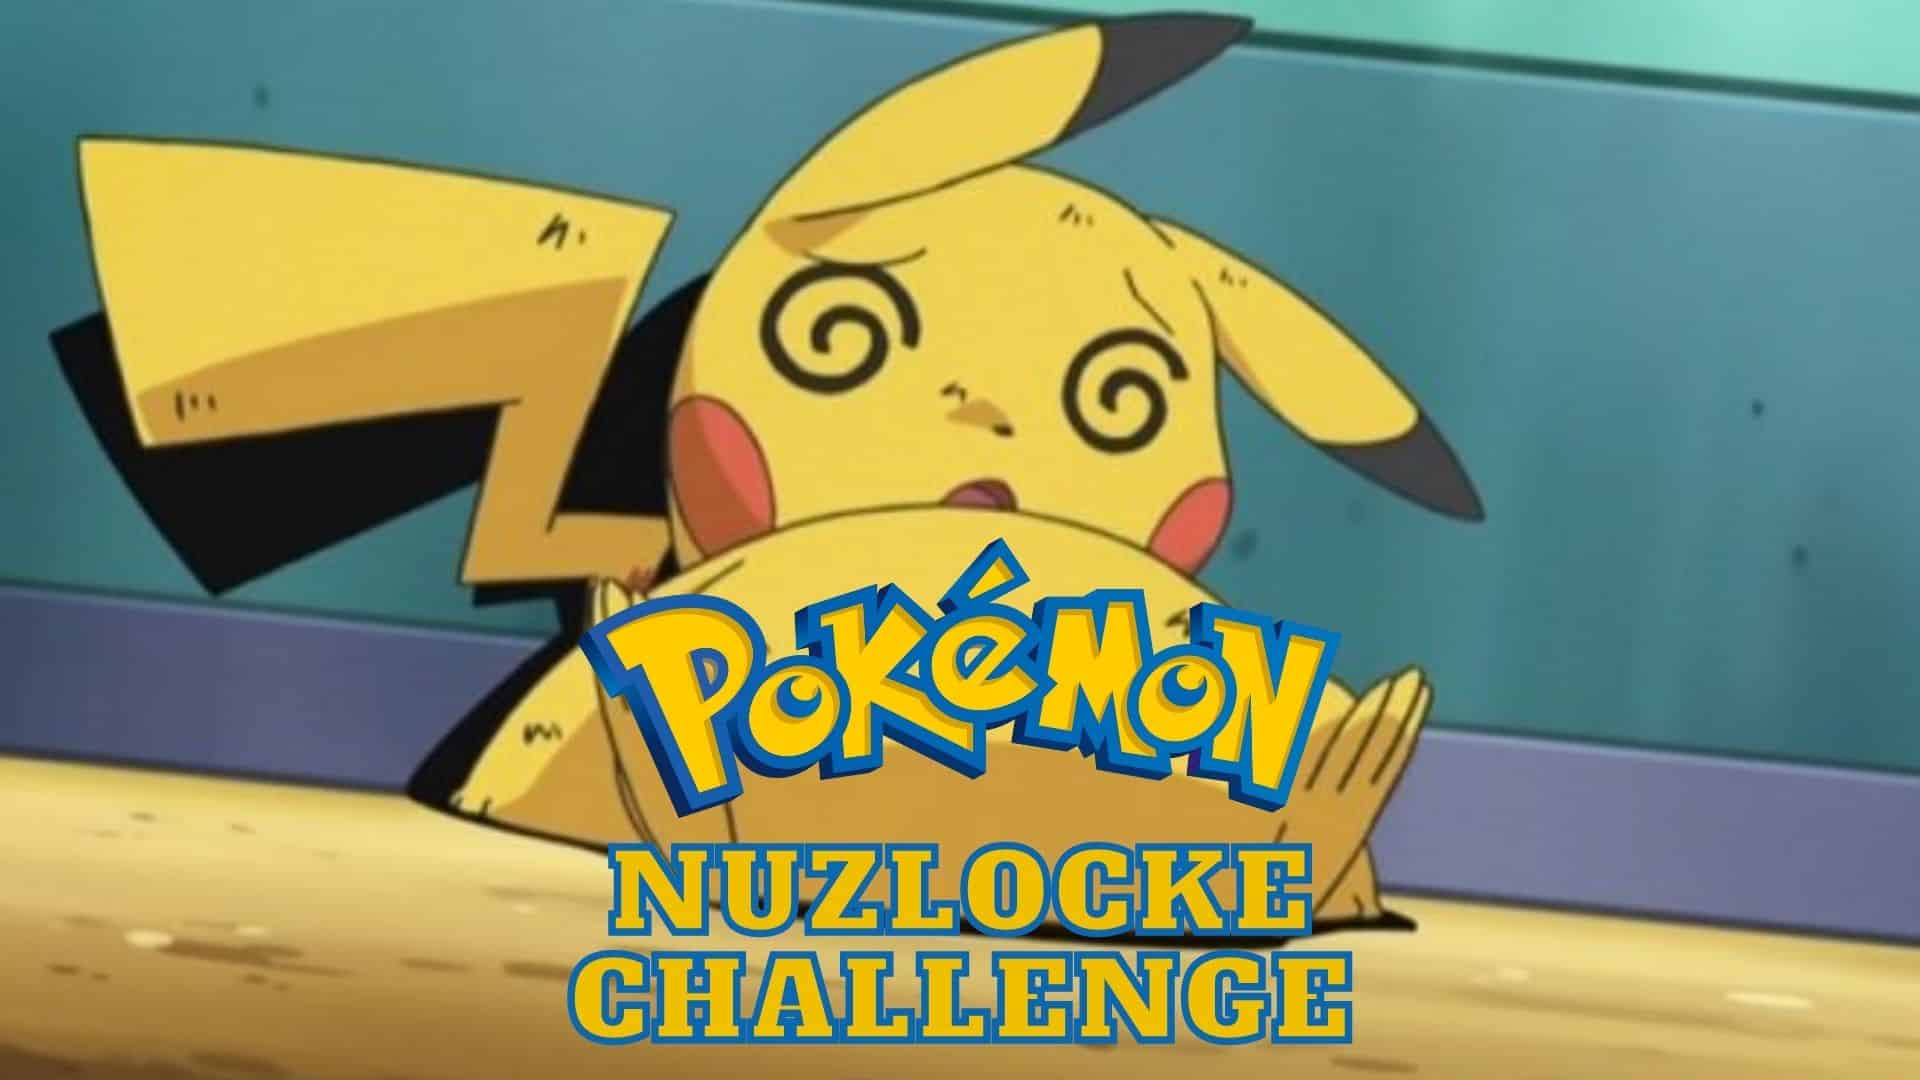 An image of fainted Pikachu with the words 'Pokemon Nuzlocke Challenge' over it